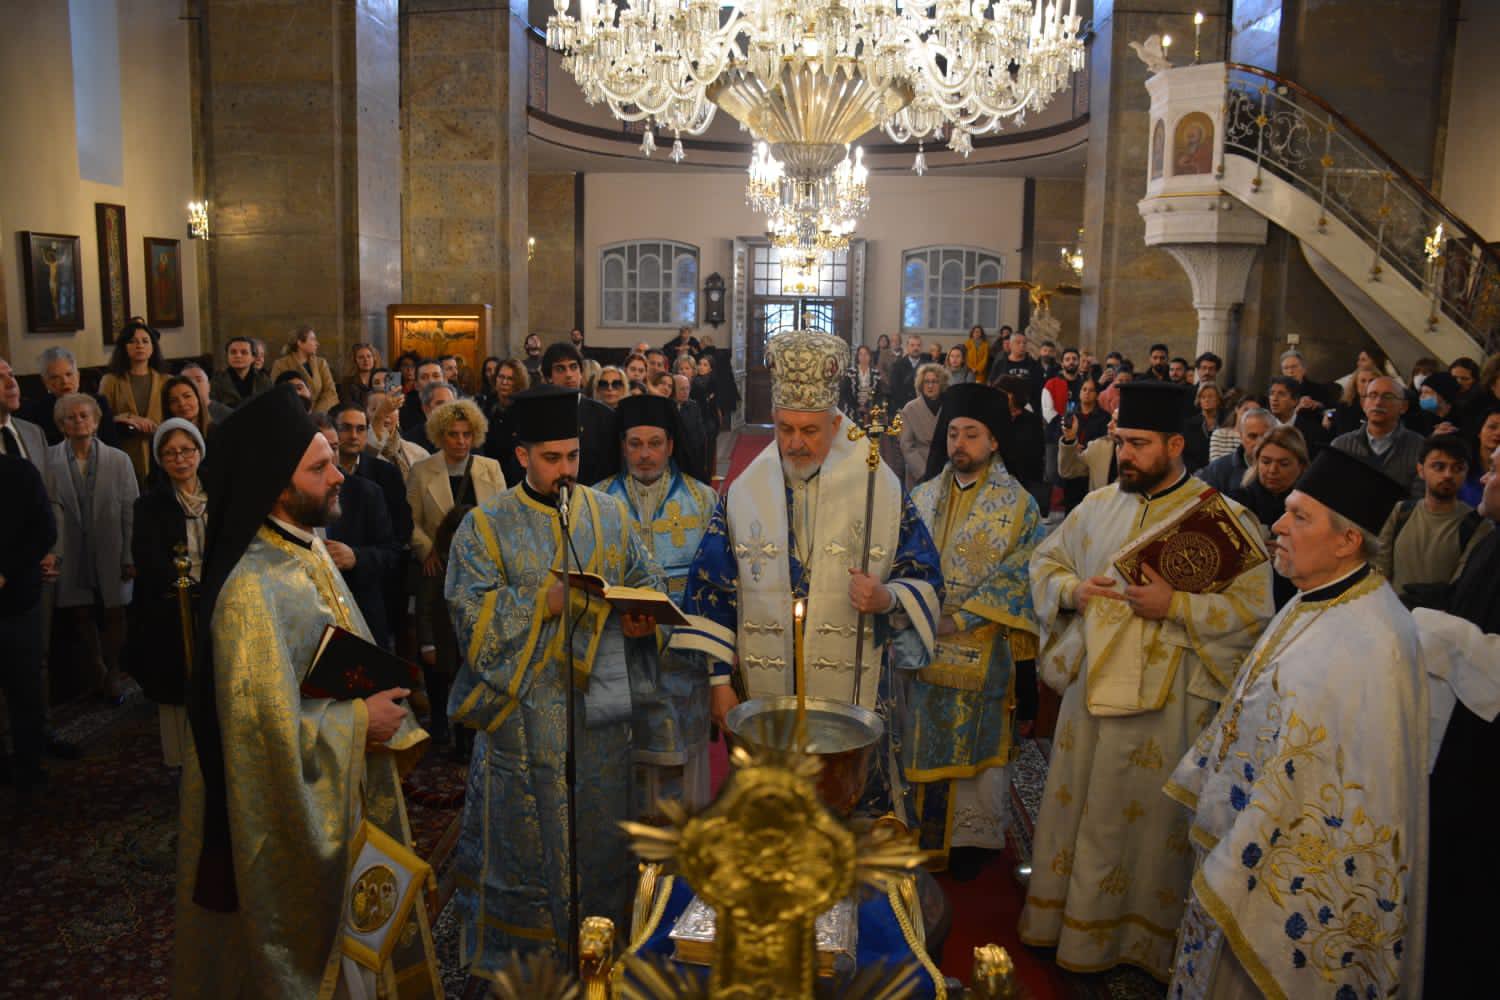 The Blessing of the Waters and throwing of the Cross took place in Chalcedon after 68 years